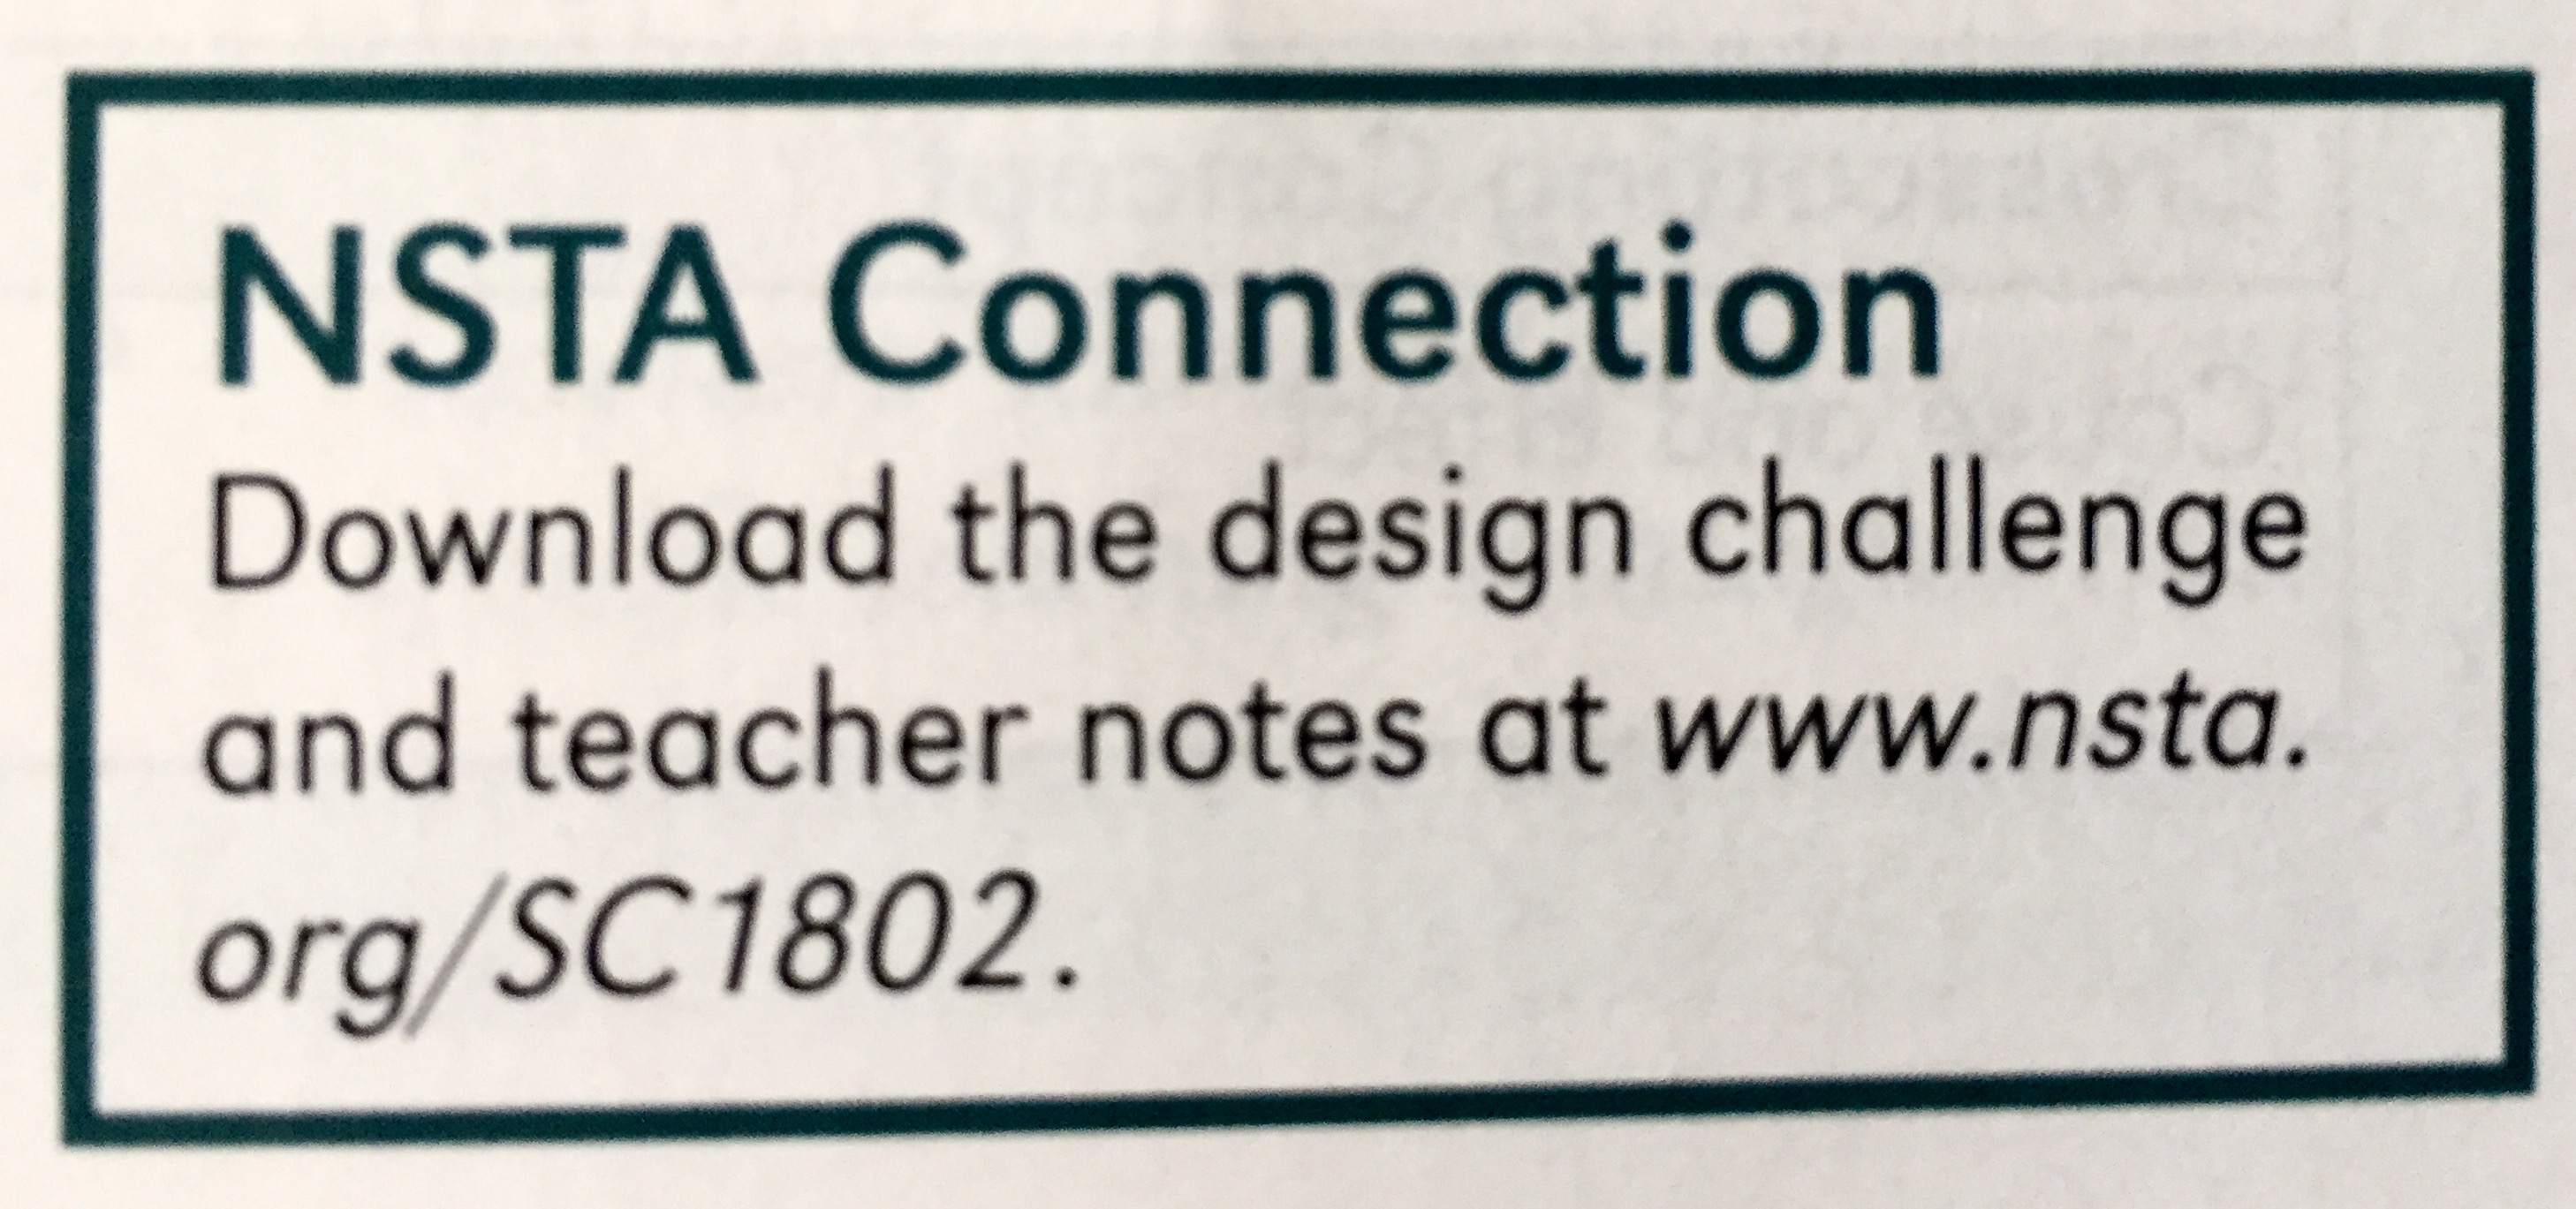 Box for NSTA Connection: information about additional materials online